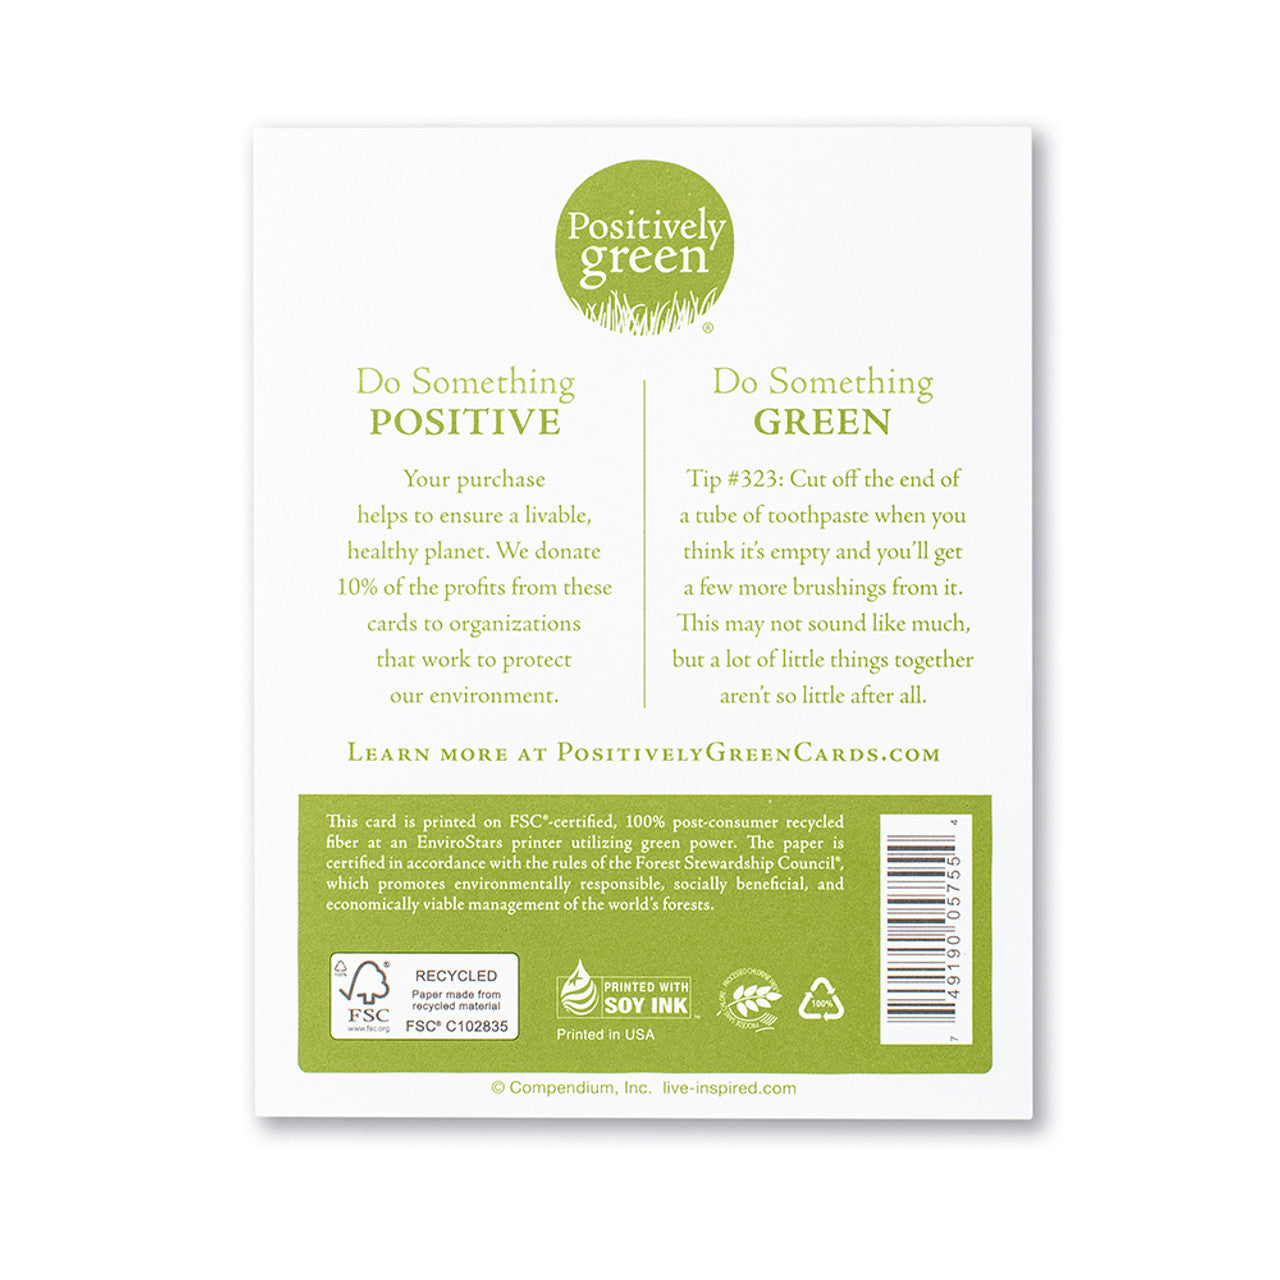 Positively Green Thank You Greeting Card - “Kind thoughts, kind words, kind deeds, how brightly they always shine…” —Mary Anderson - Mellow Monkey